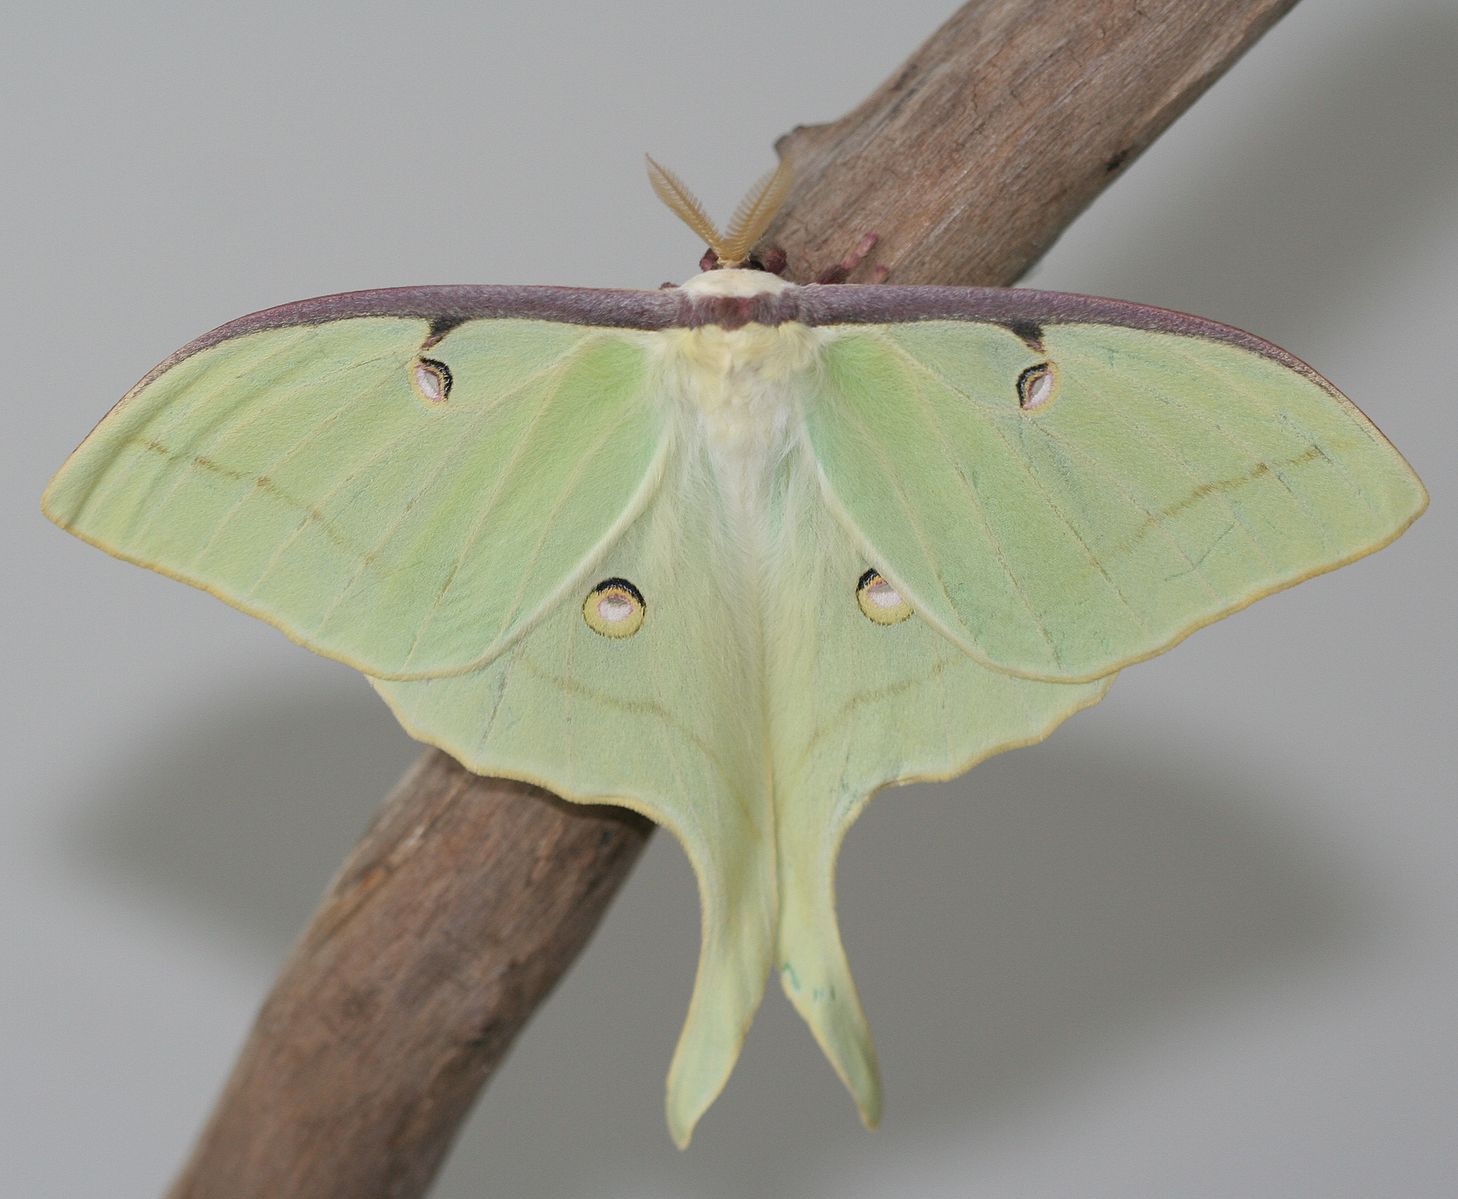 Male Luna moth resting on a branch, with the same wing markings as a female but lighter in green color. He also has fuzzier antennae.